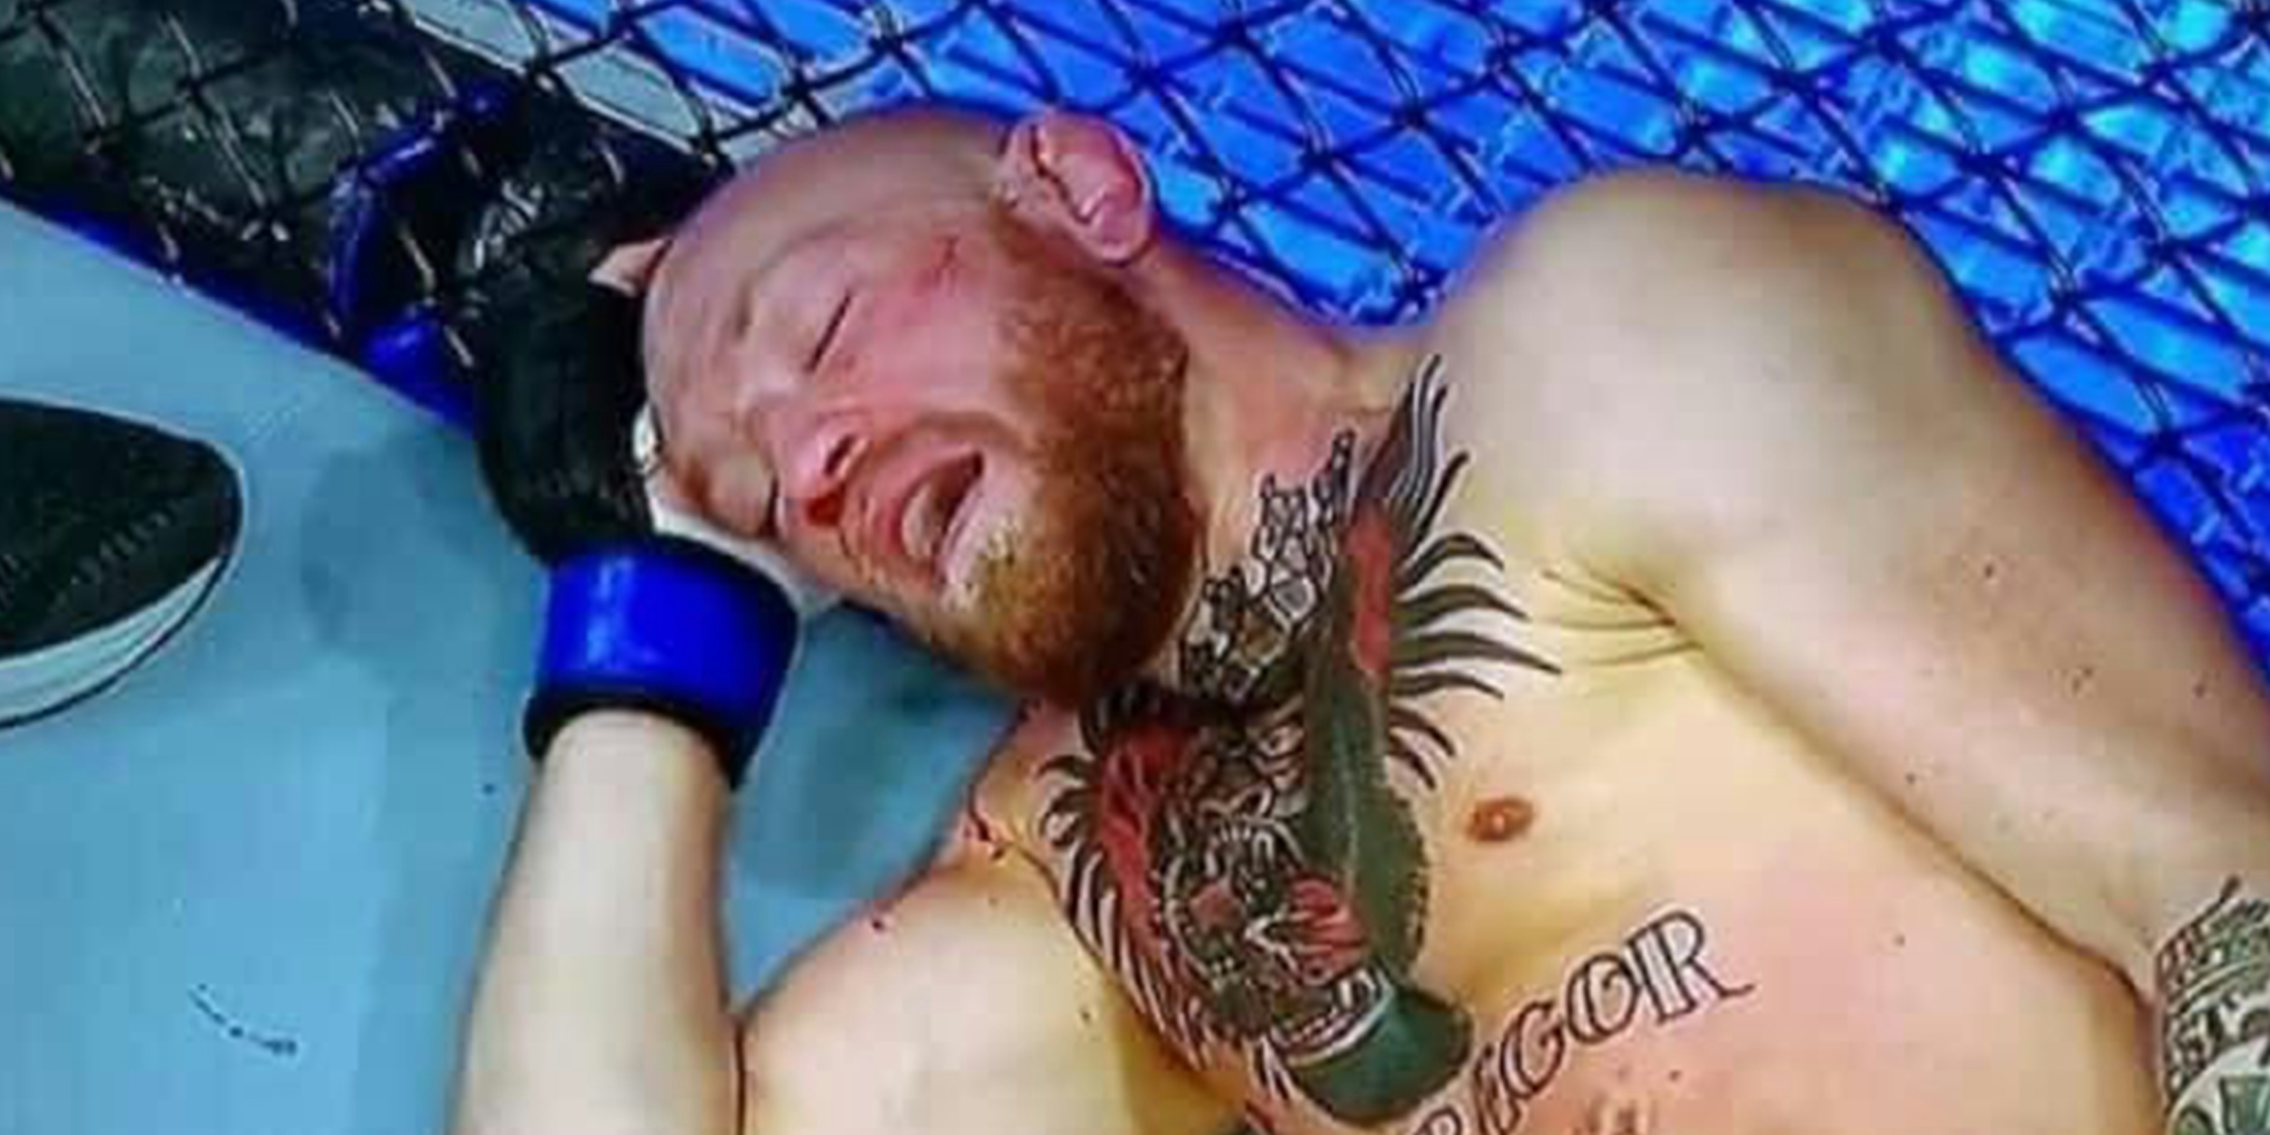 conor mcgregor knocked out